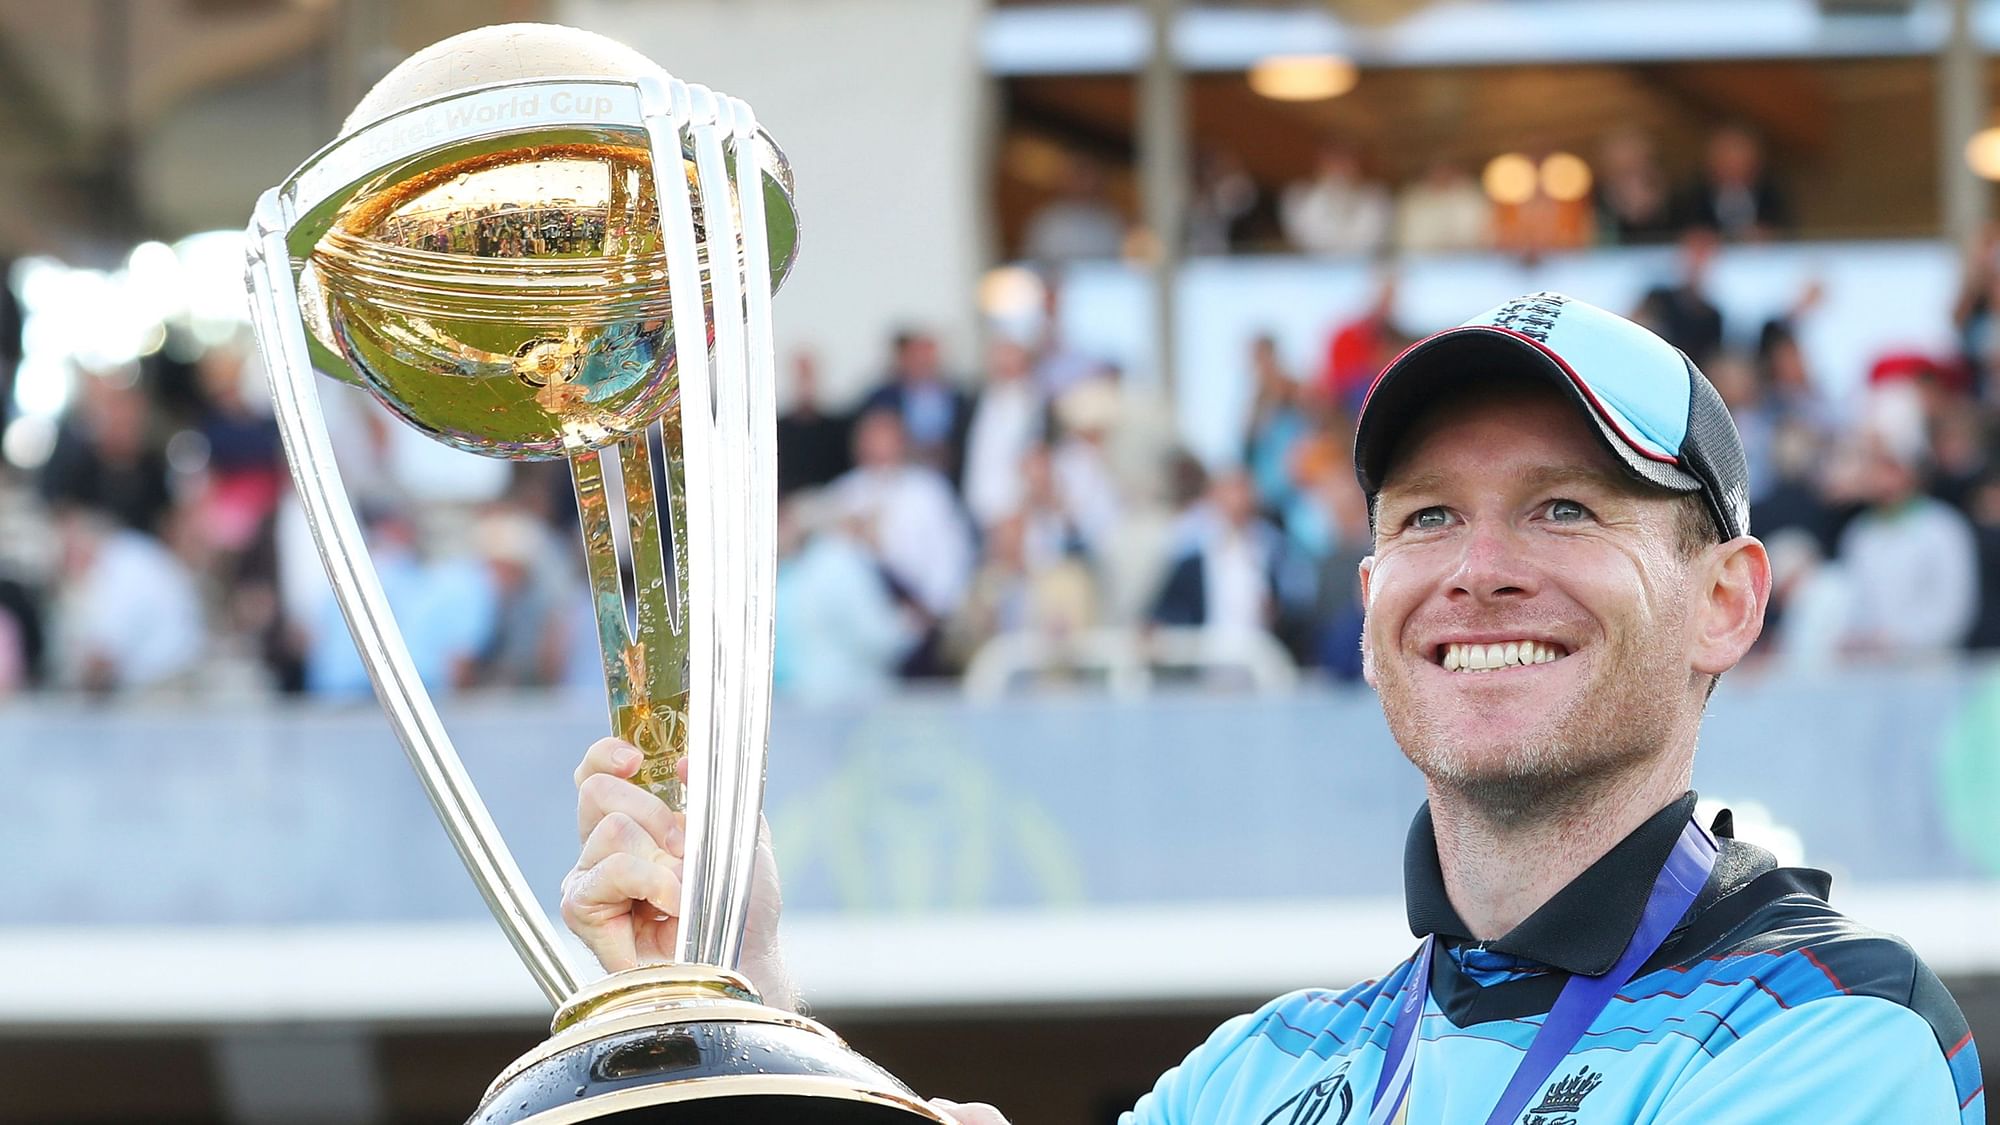 England’s captain Eoin Morgan lifts the trophy after winning the Cricket World Cup final at Lord’s.